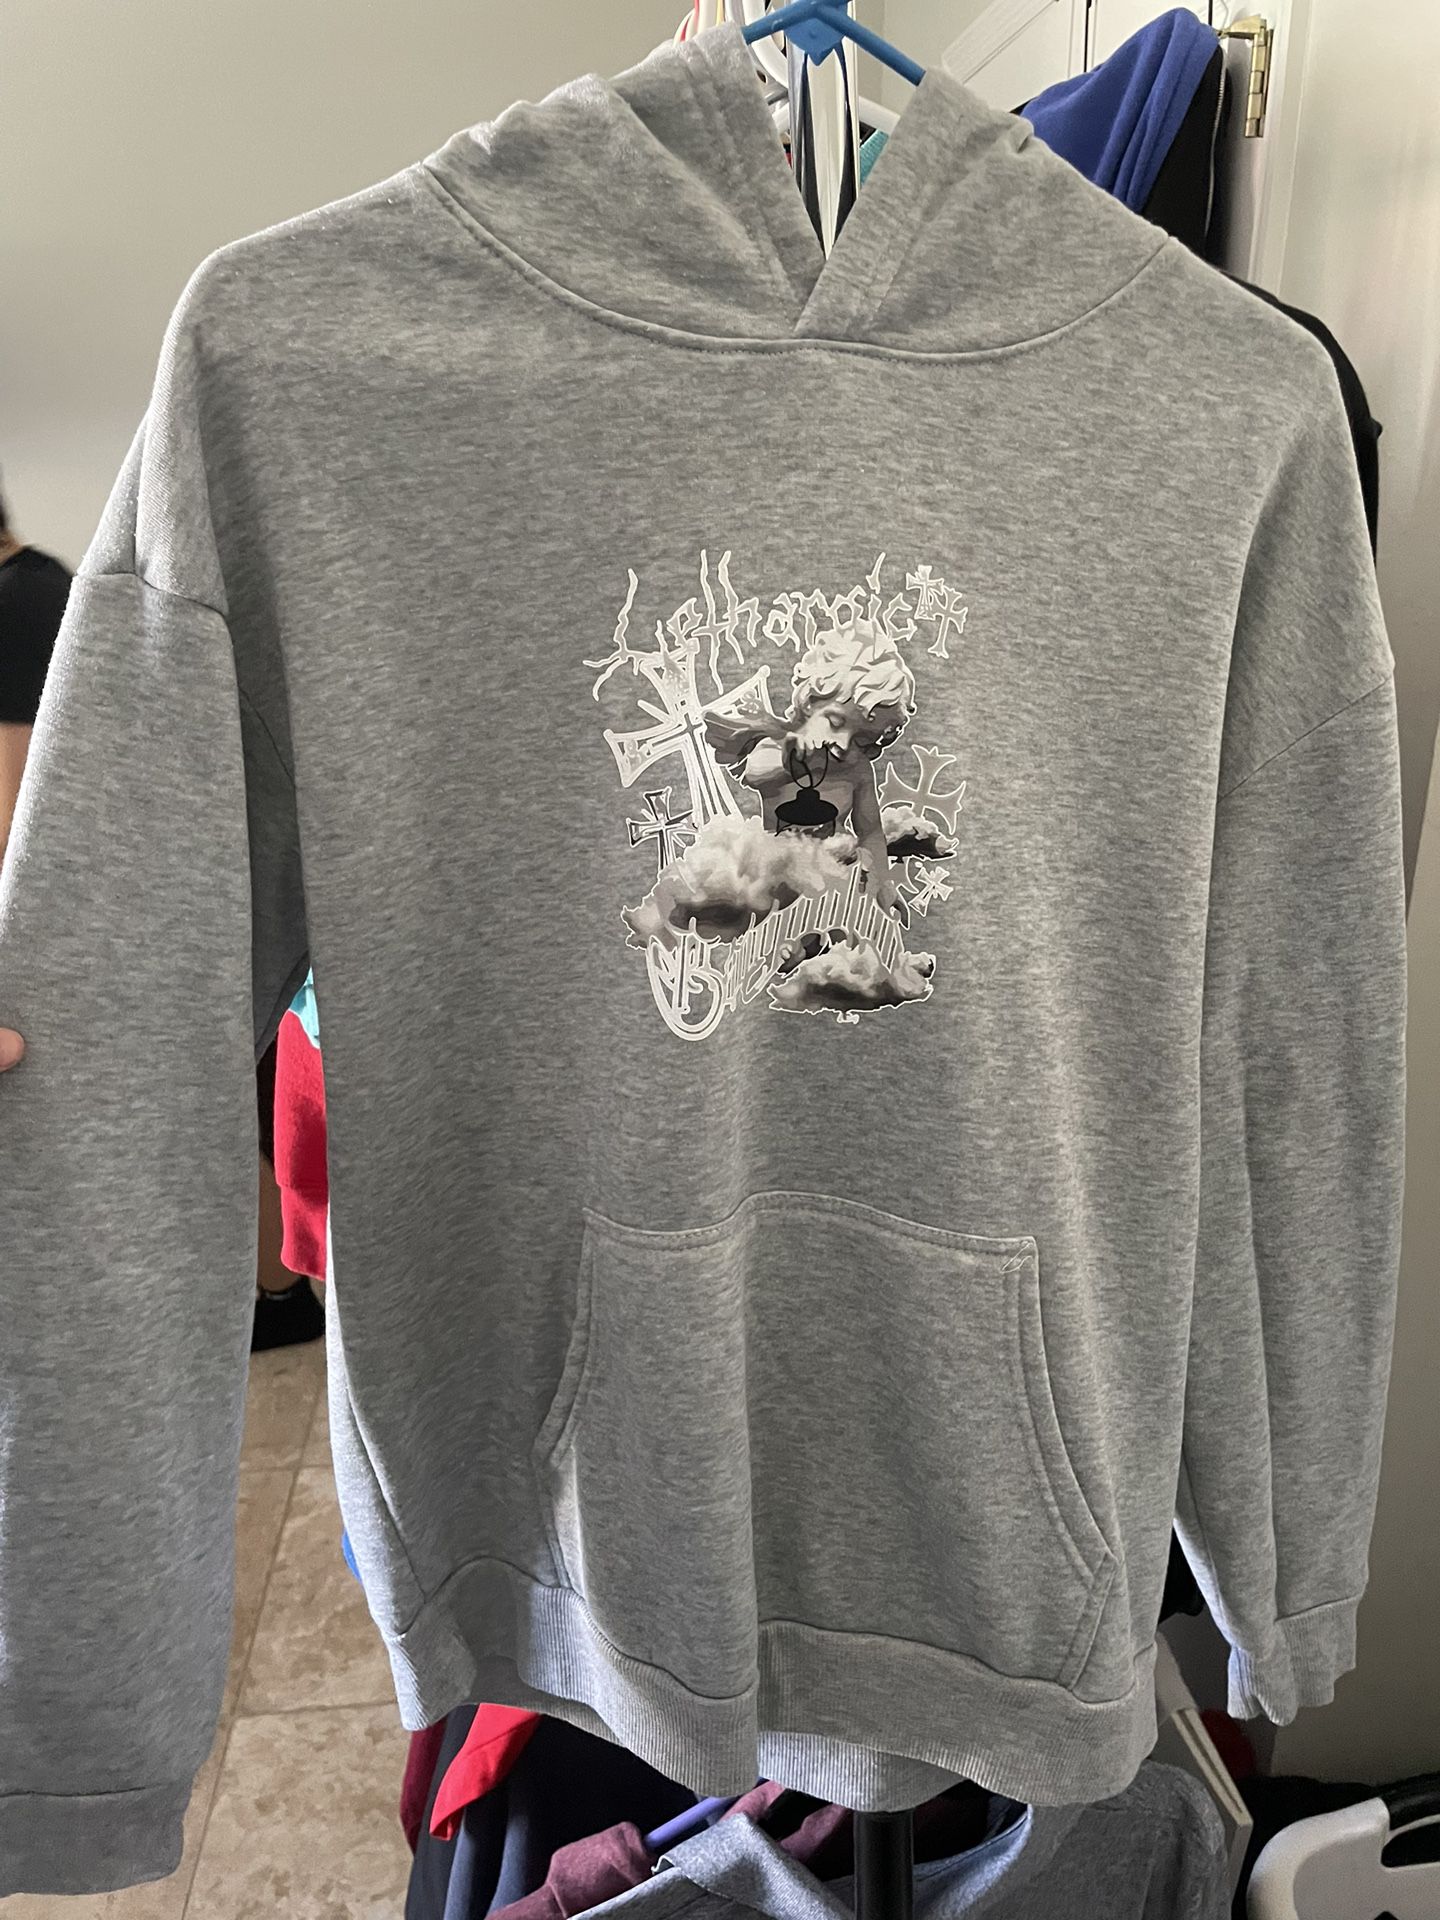 Small Pull Over Hoodie